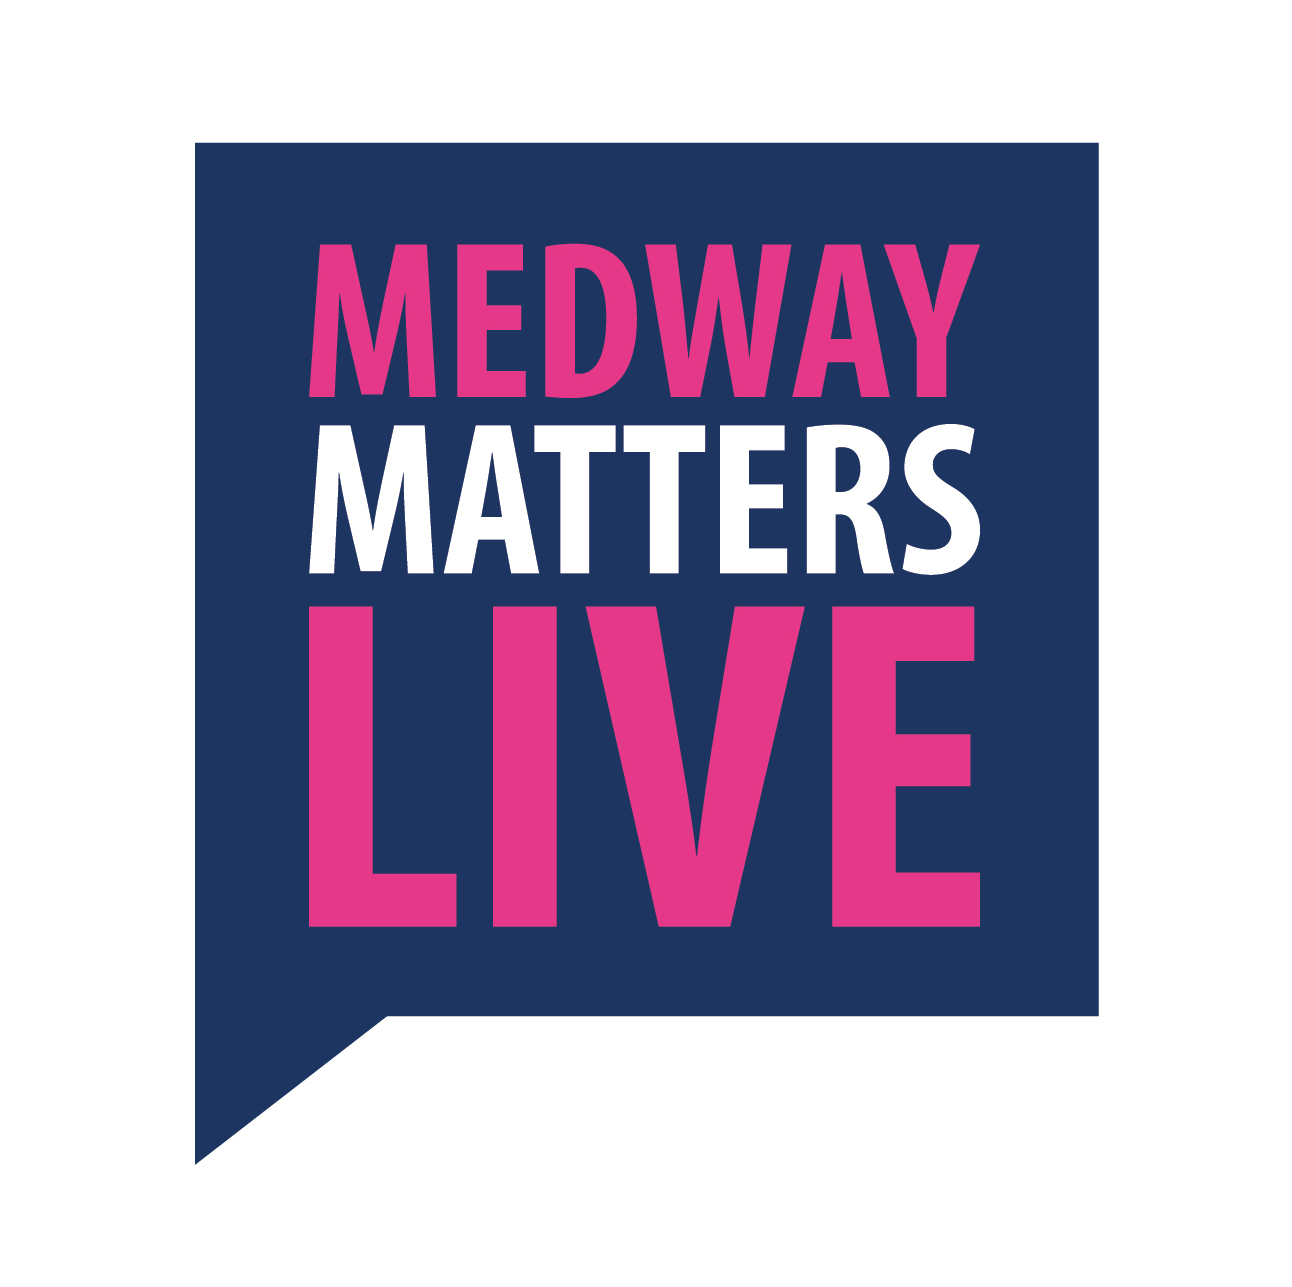 A graphic showing a blue speech bubble with writing in it that says "Medway Matters Live".